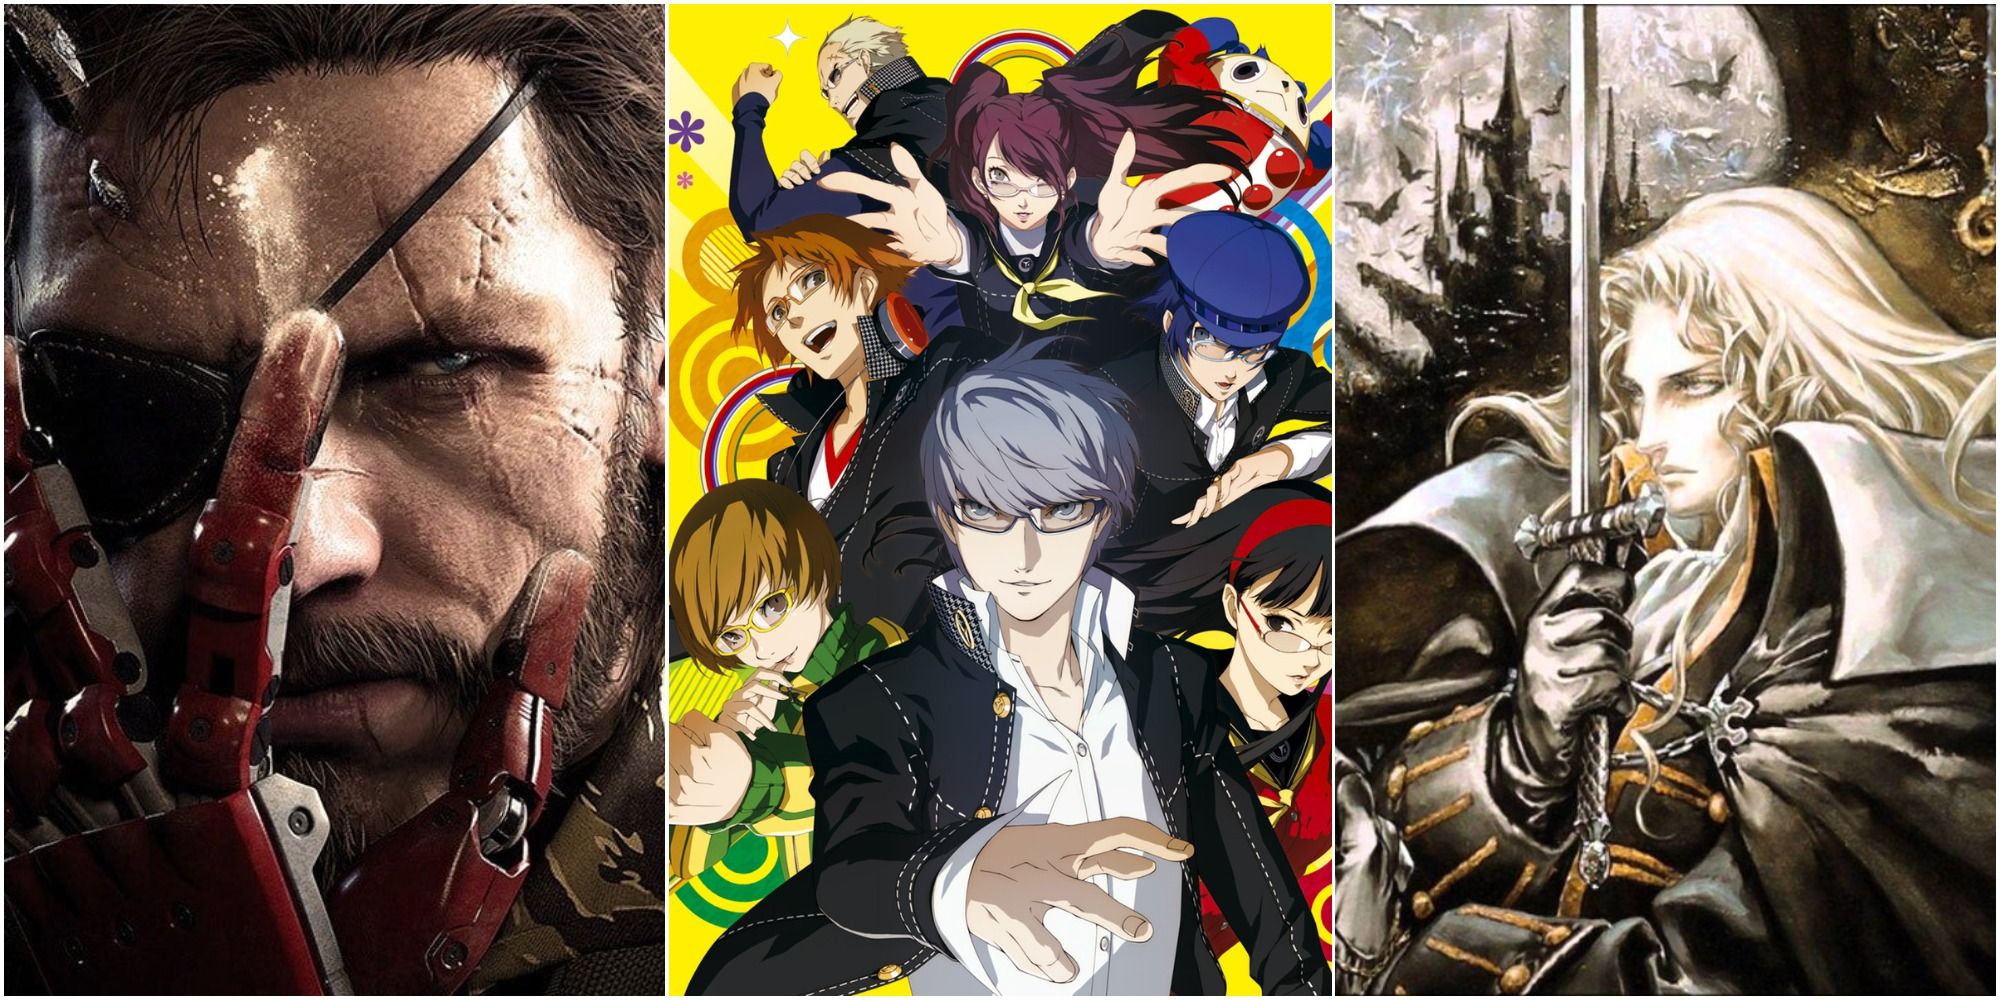 Games Kept Going Featured - Metal Gear Solid 5, Persona 4, Castlevania Symphony Of The Night